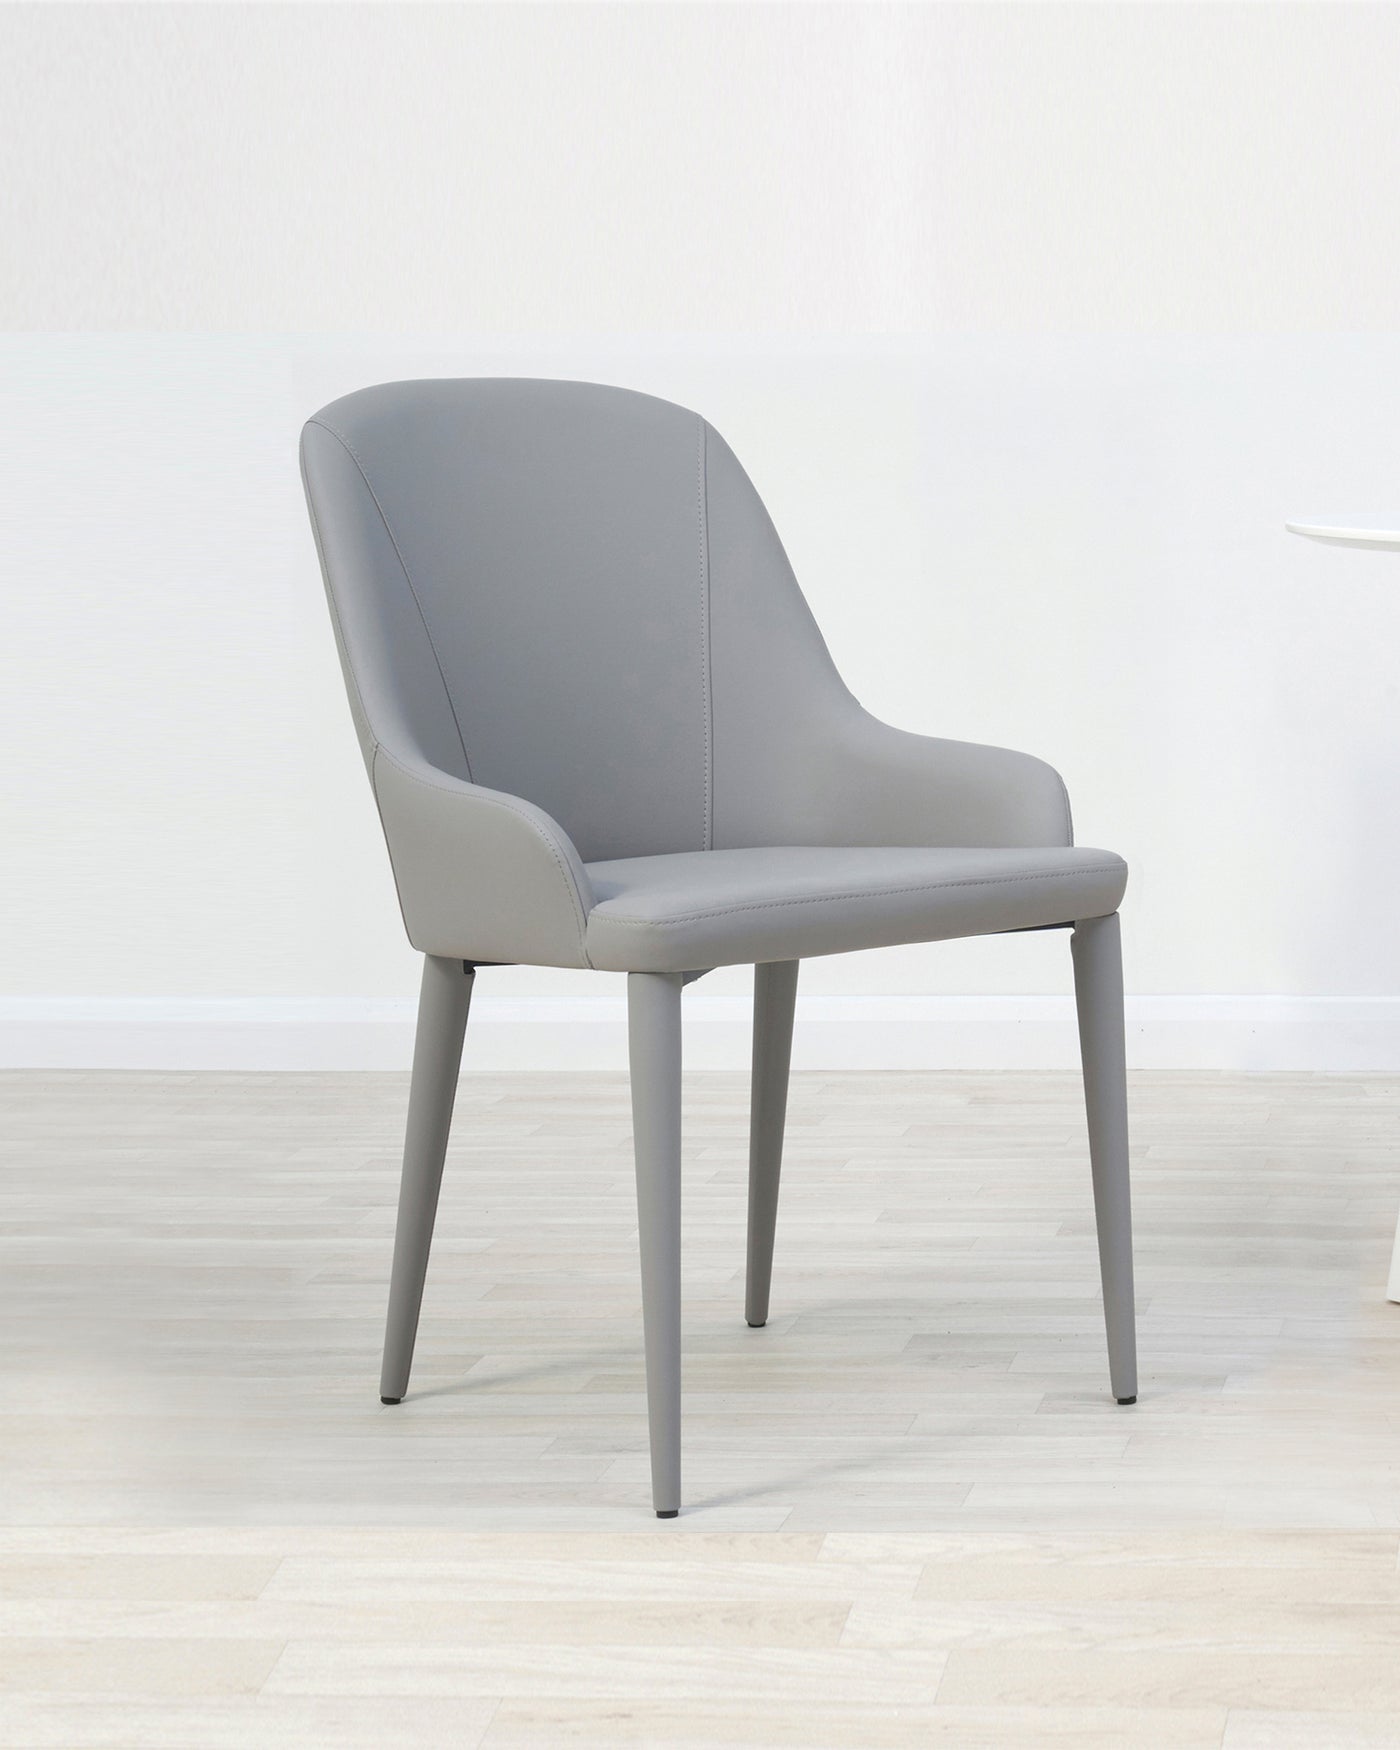 Modern grey dining chair with upholstered seat and backrest, featuring a curved silhouette and streamlined metal legs.